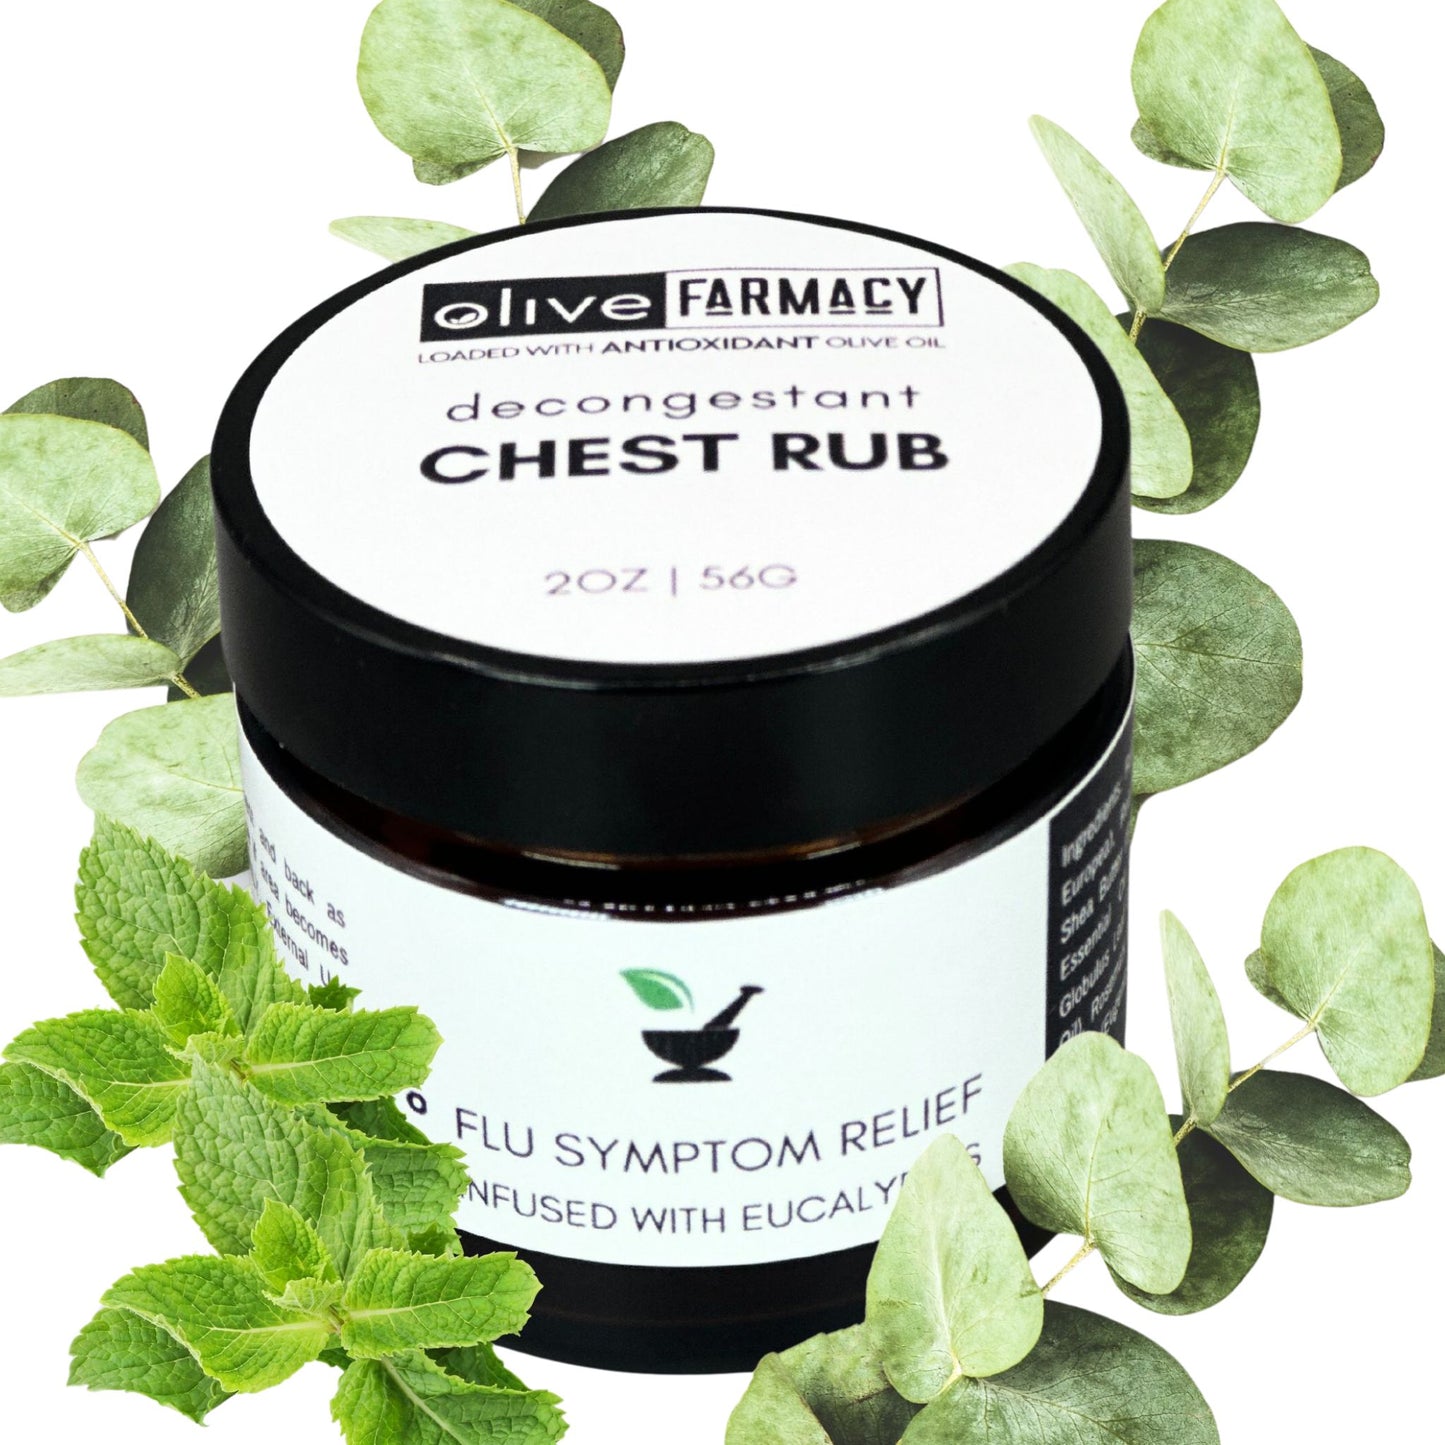 Natural Chest Rub for Coughs and Colds By Olive Farmacy